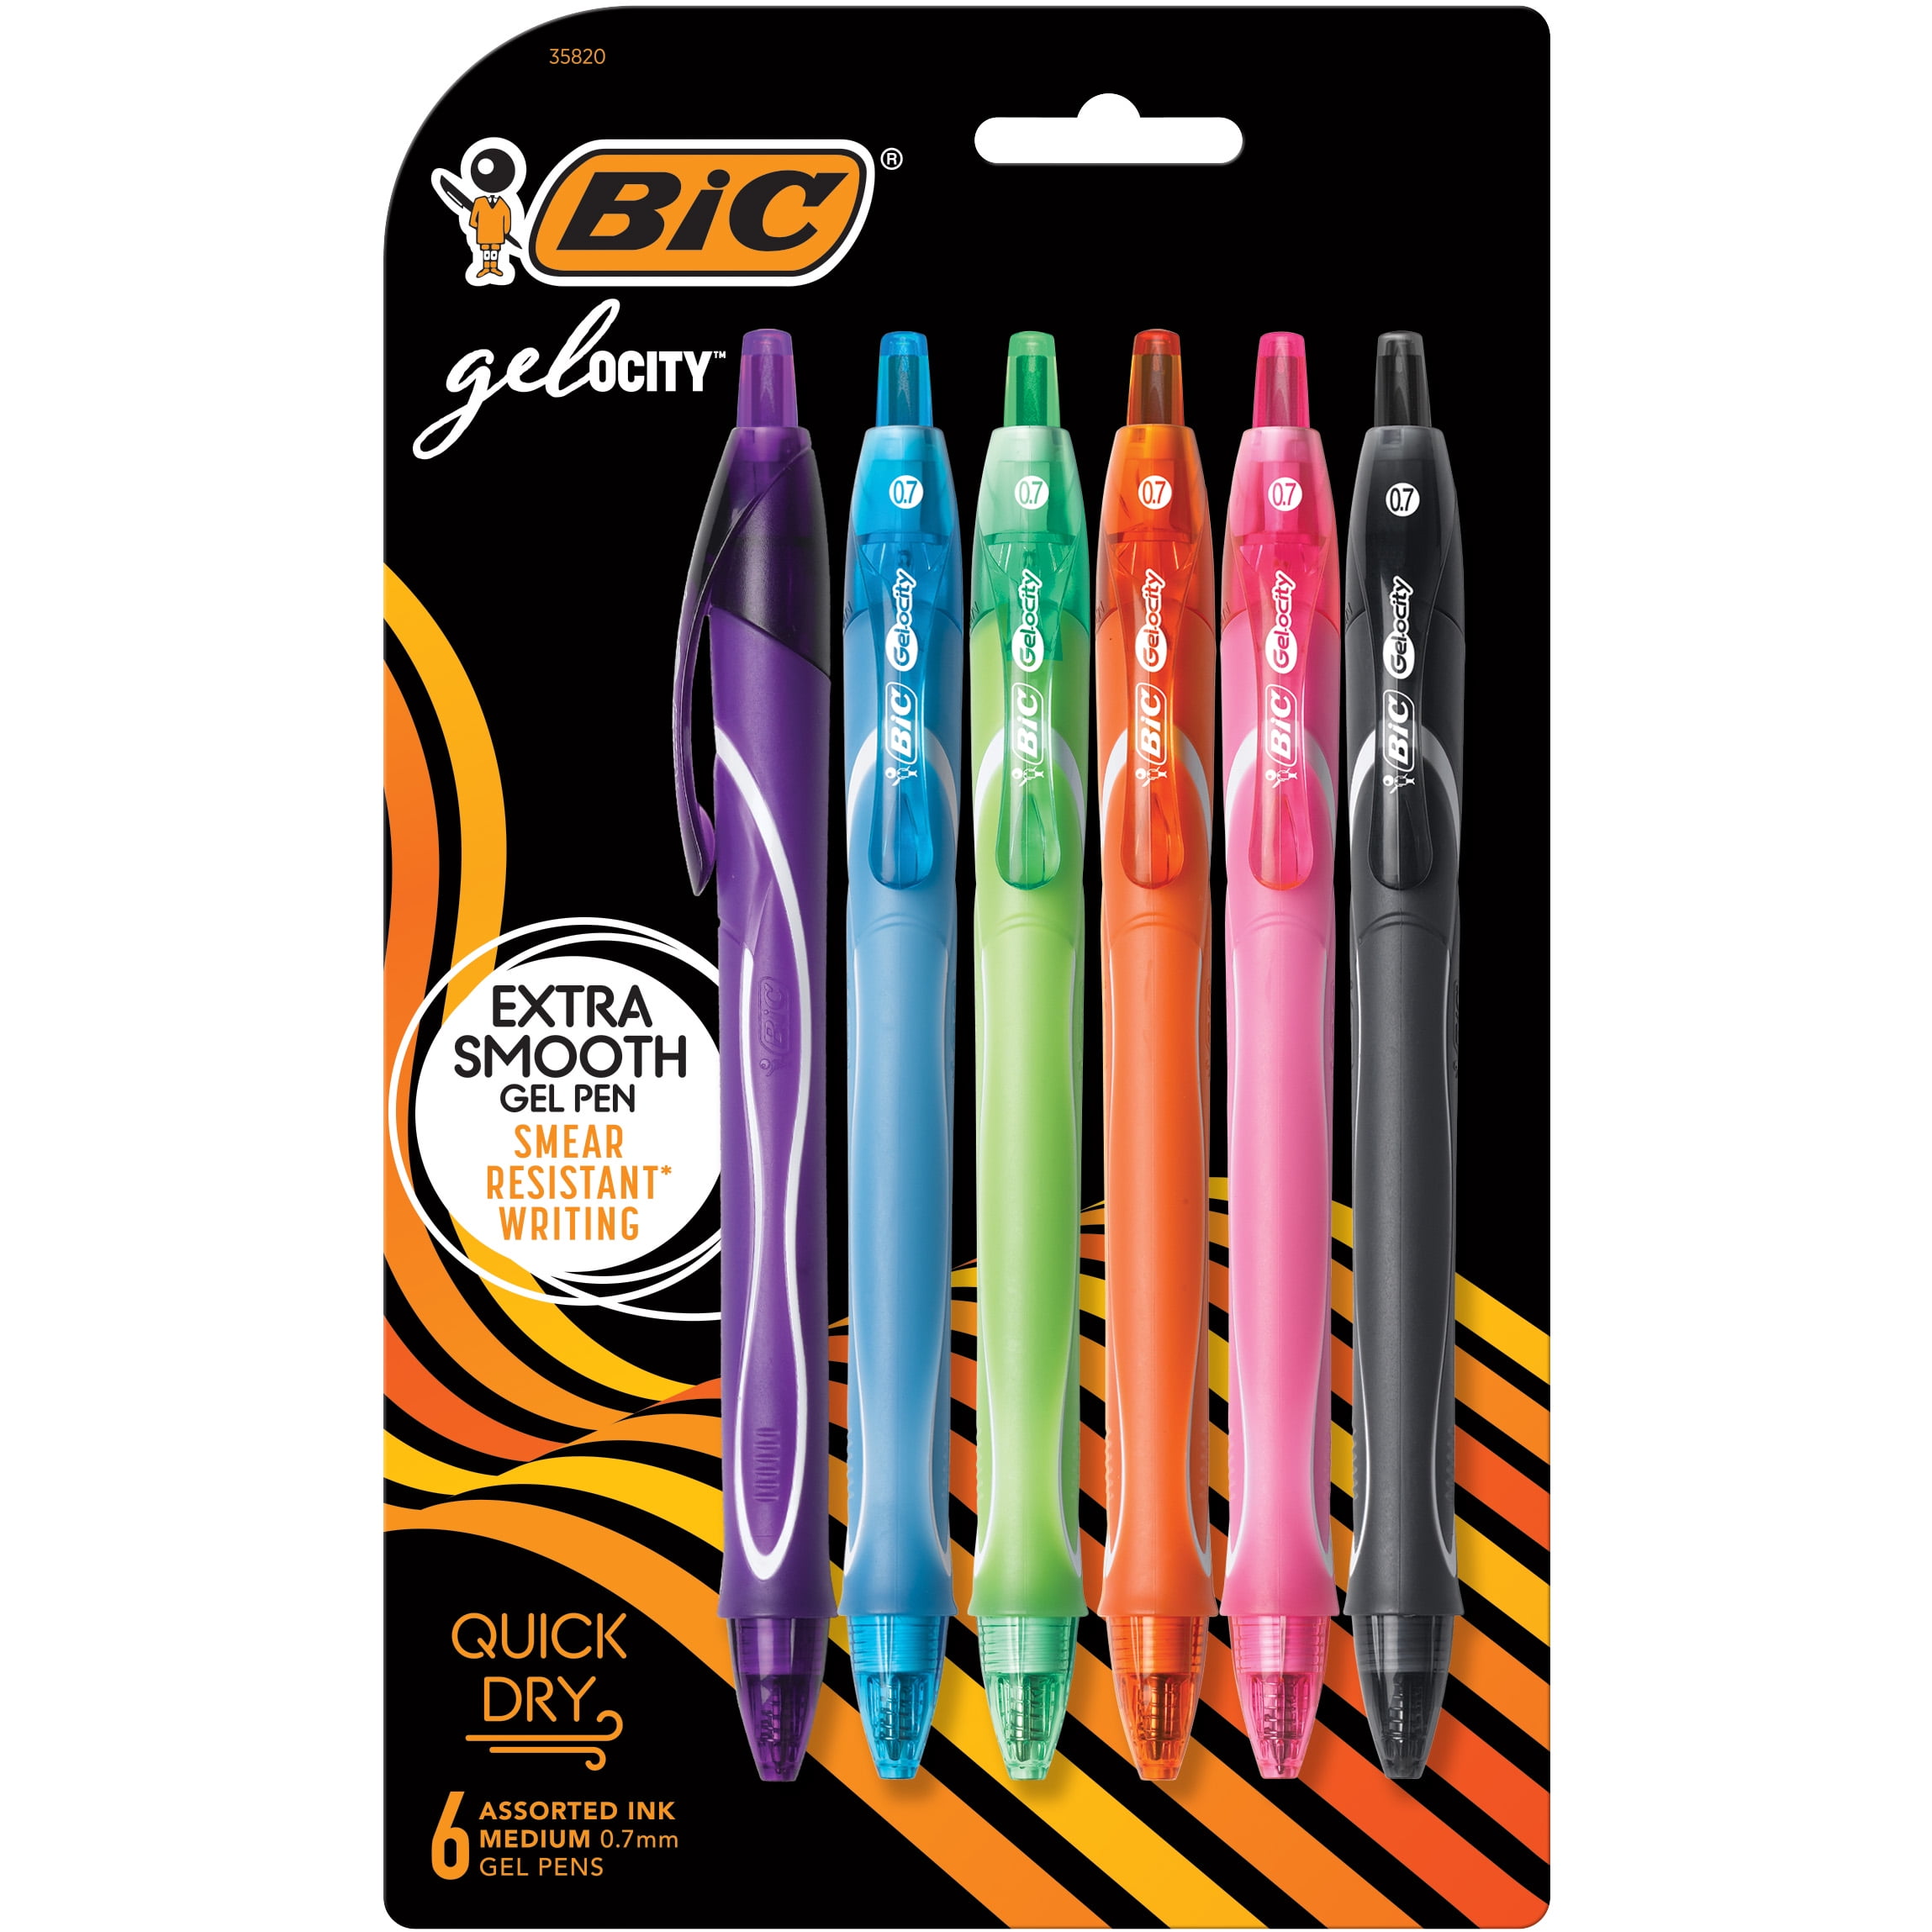 BIC Gel-ocity Quick Dry Special Edition Fashion Gel Pen with Stand, Medium  Point (0.7mm), Assorted Colors, For a Smooth Writing Experience, 6-Count,  Colors may vary 